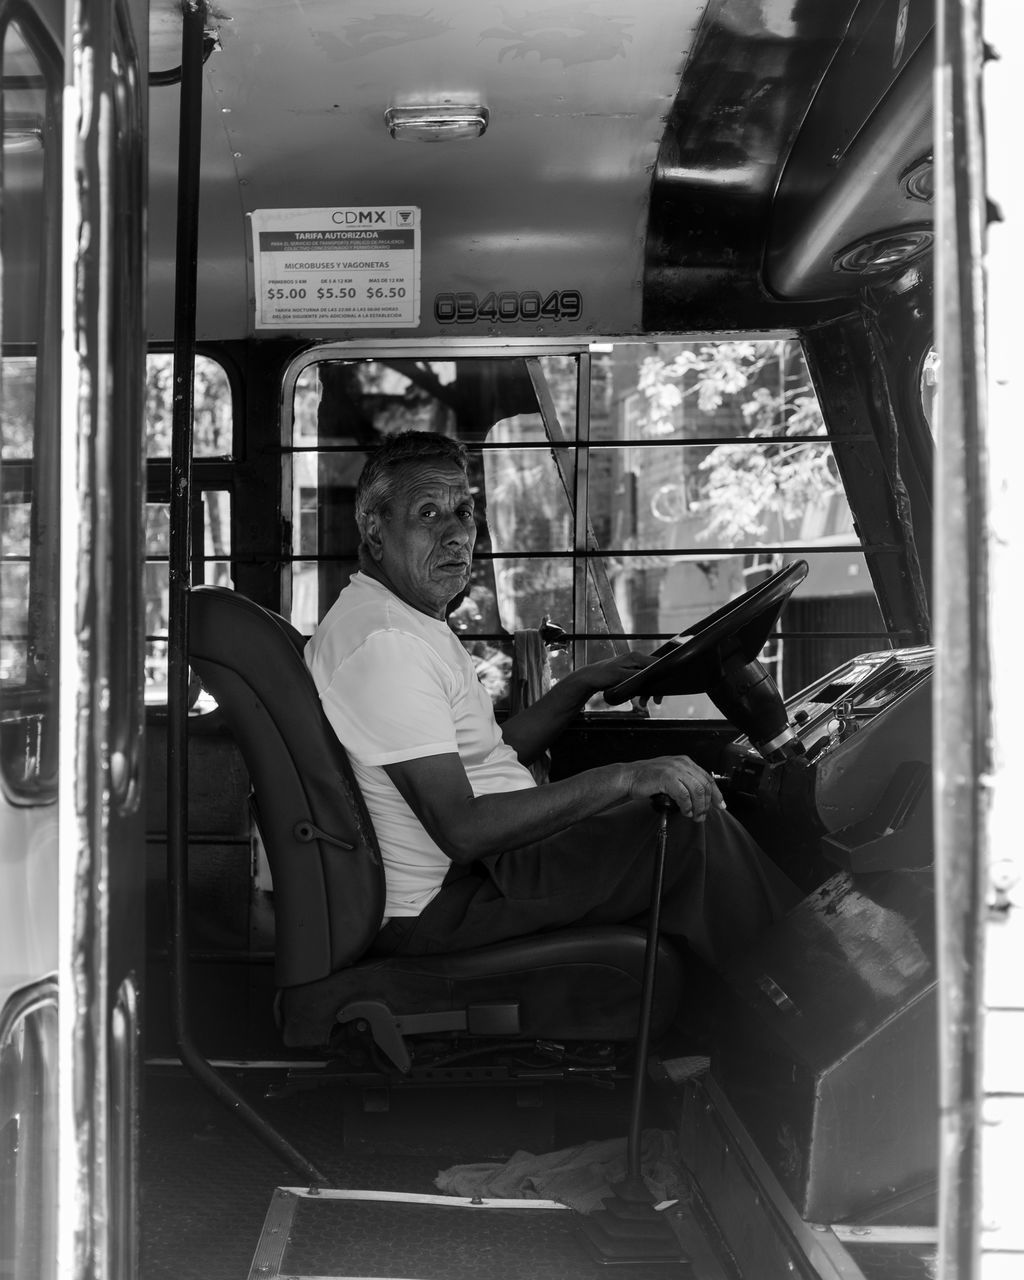 sitting, one person, real people, mode of transportation, men, vehicle interior, transportation, vehicle seat, seat, adult, communication, land vehicle, technology, full length, side view, males, wireless technology, public transportation, driving, mature men